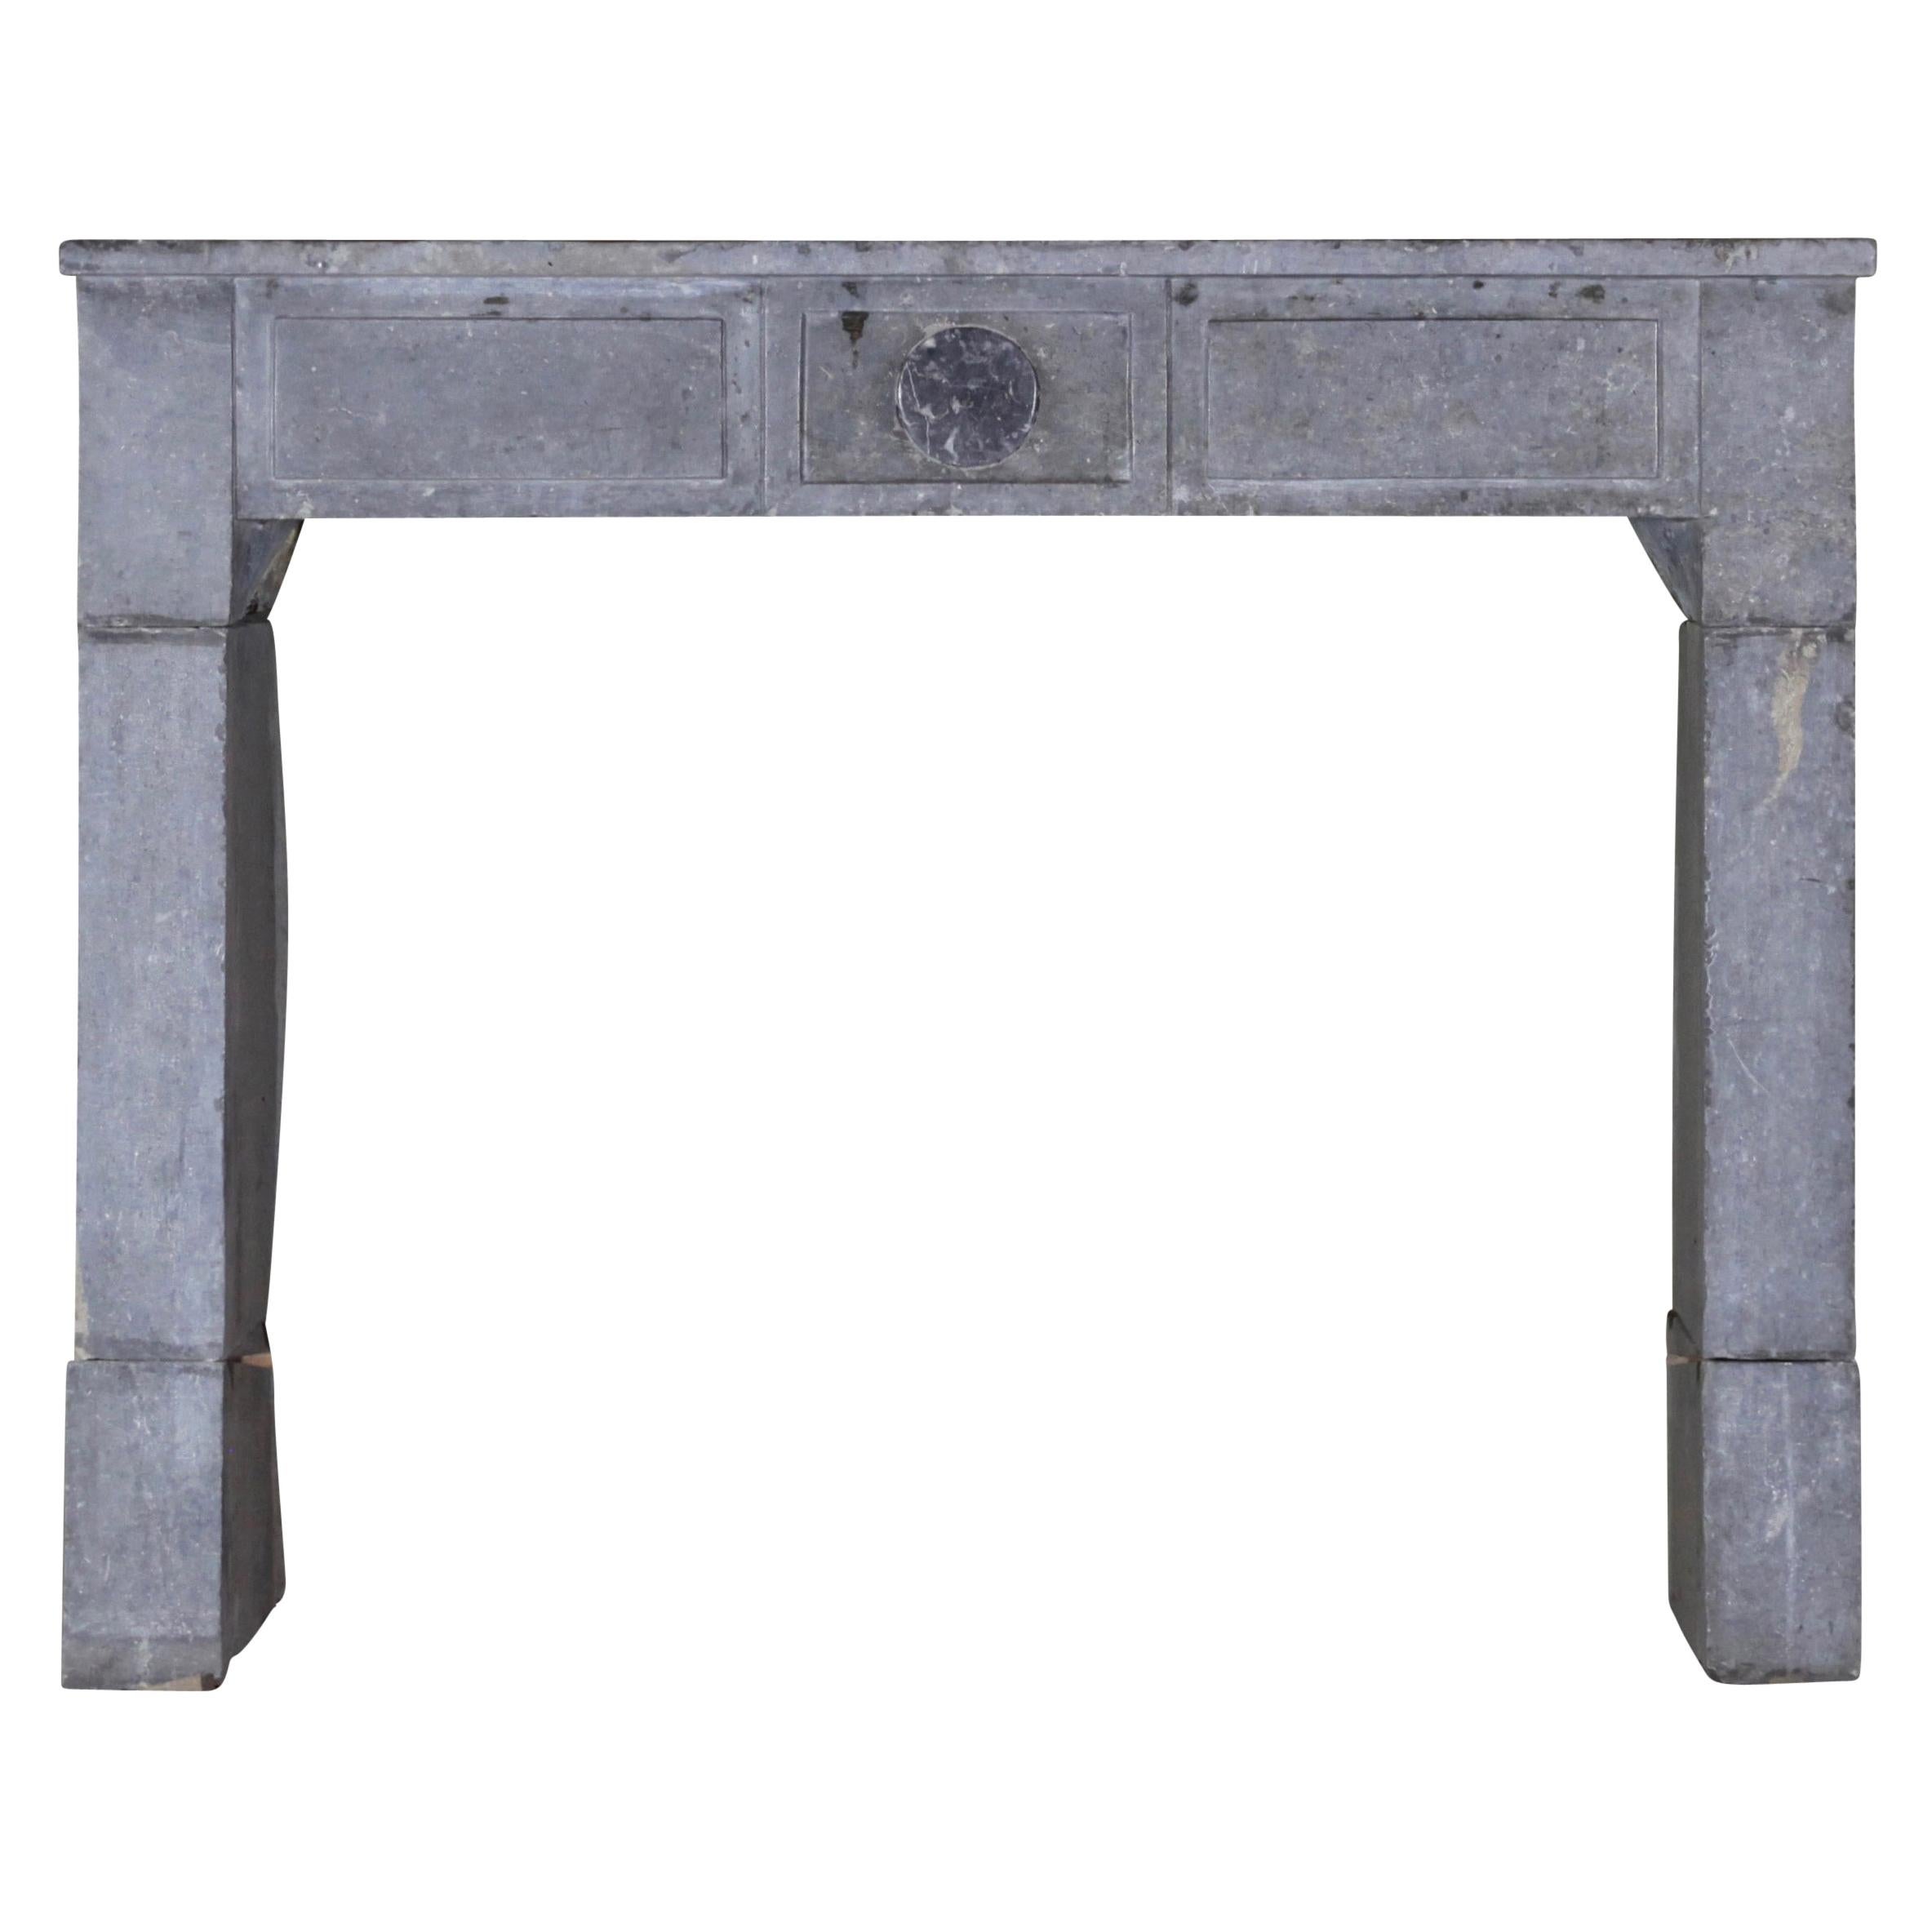 Timeless Antique Fireplace Surround In Bicolor Marble Stone For Sale